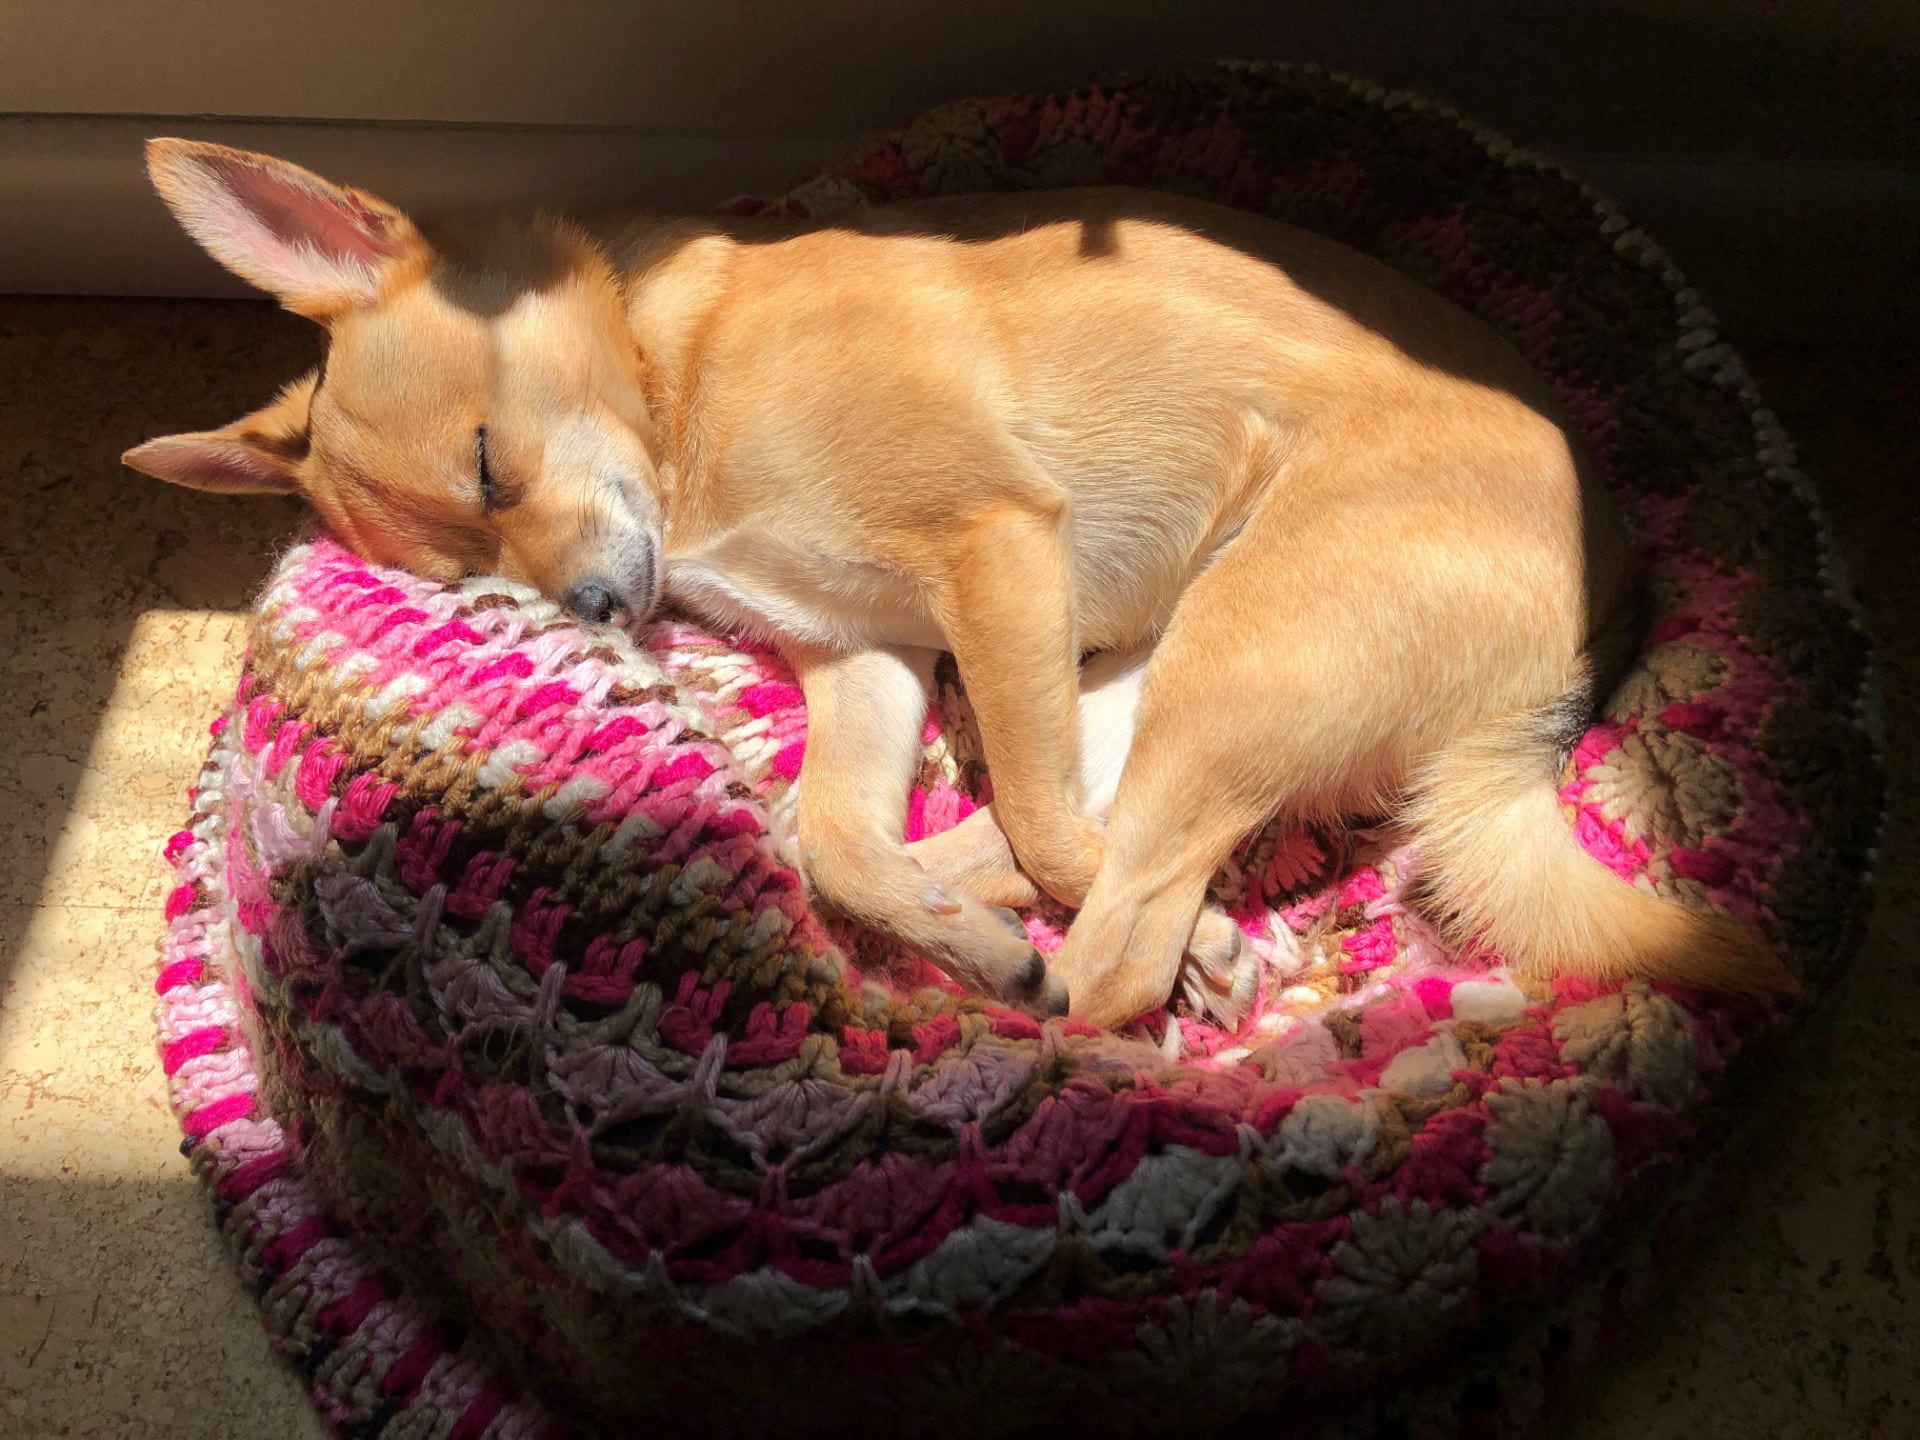 dog with large ears asleep in a basket